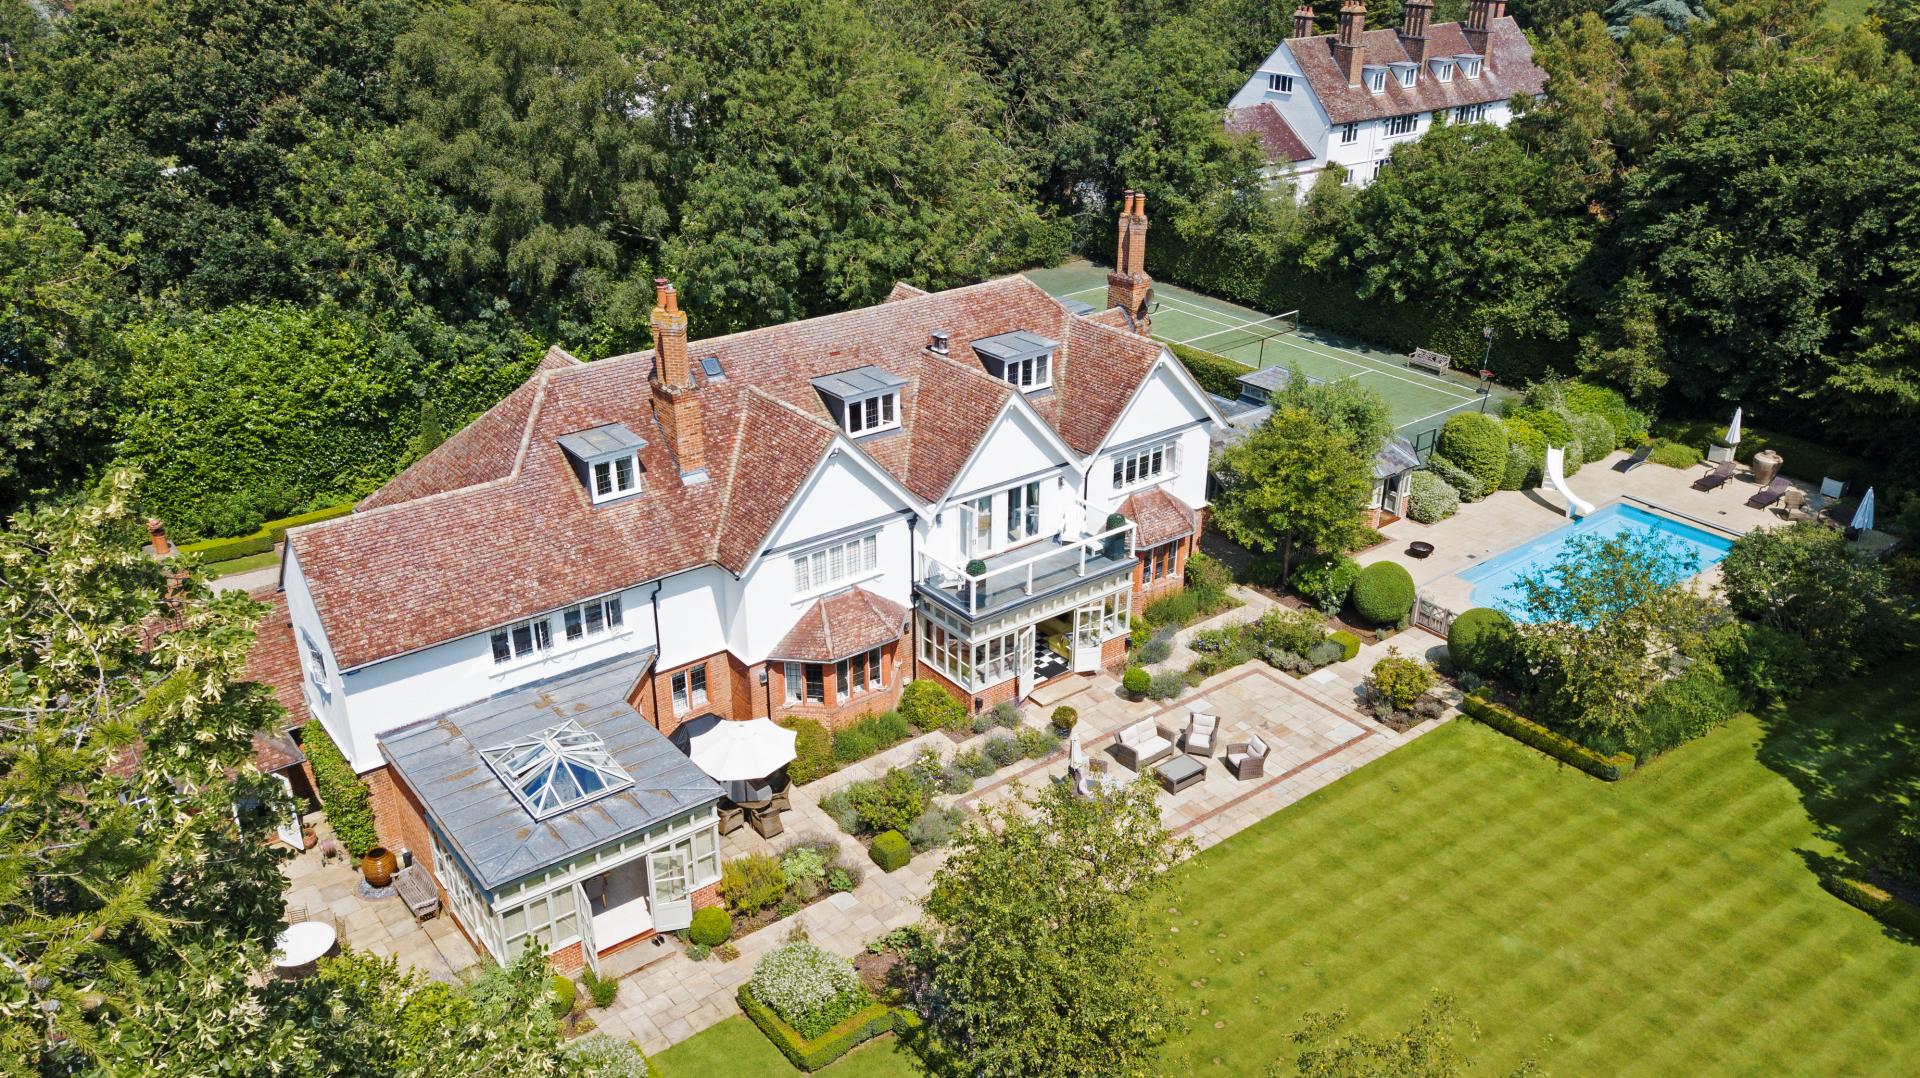 Edwardian family manor house in Essex dream home